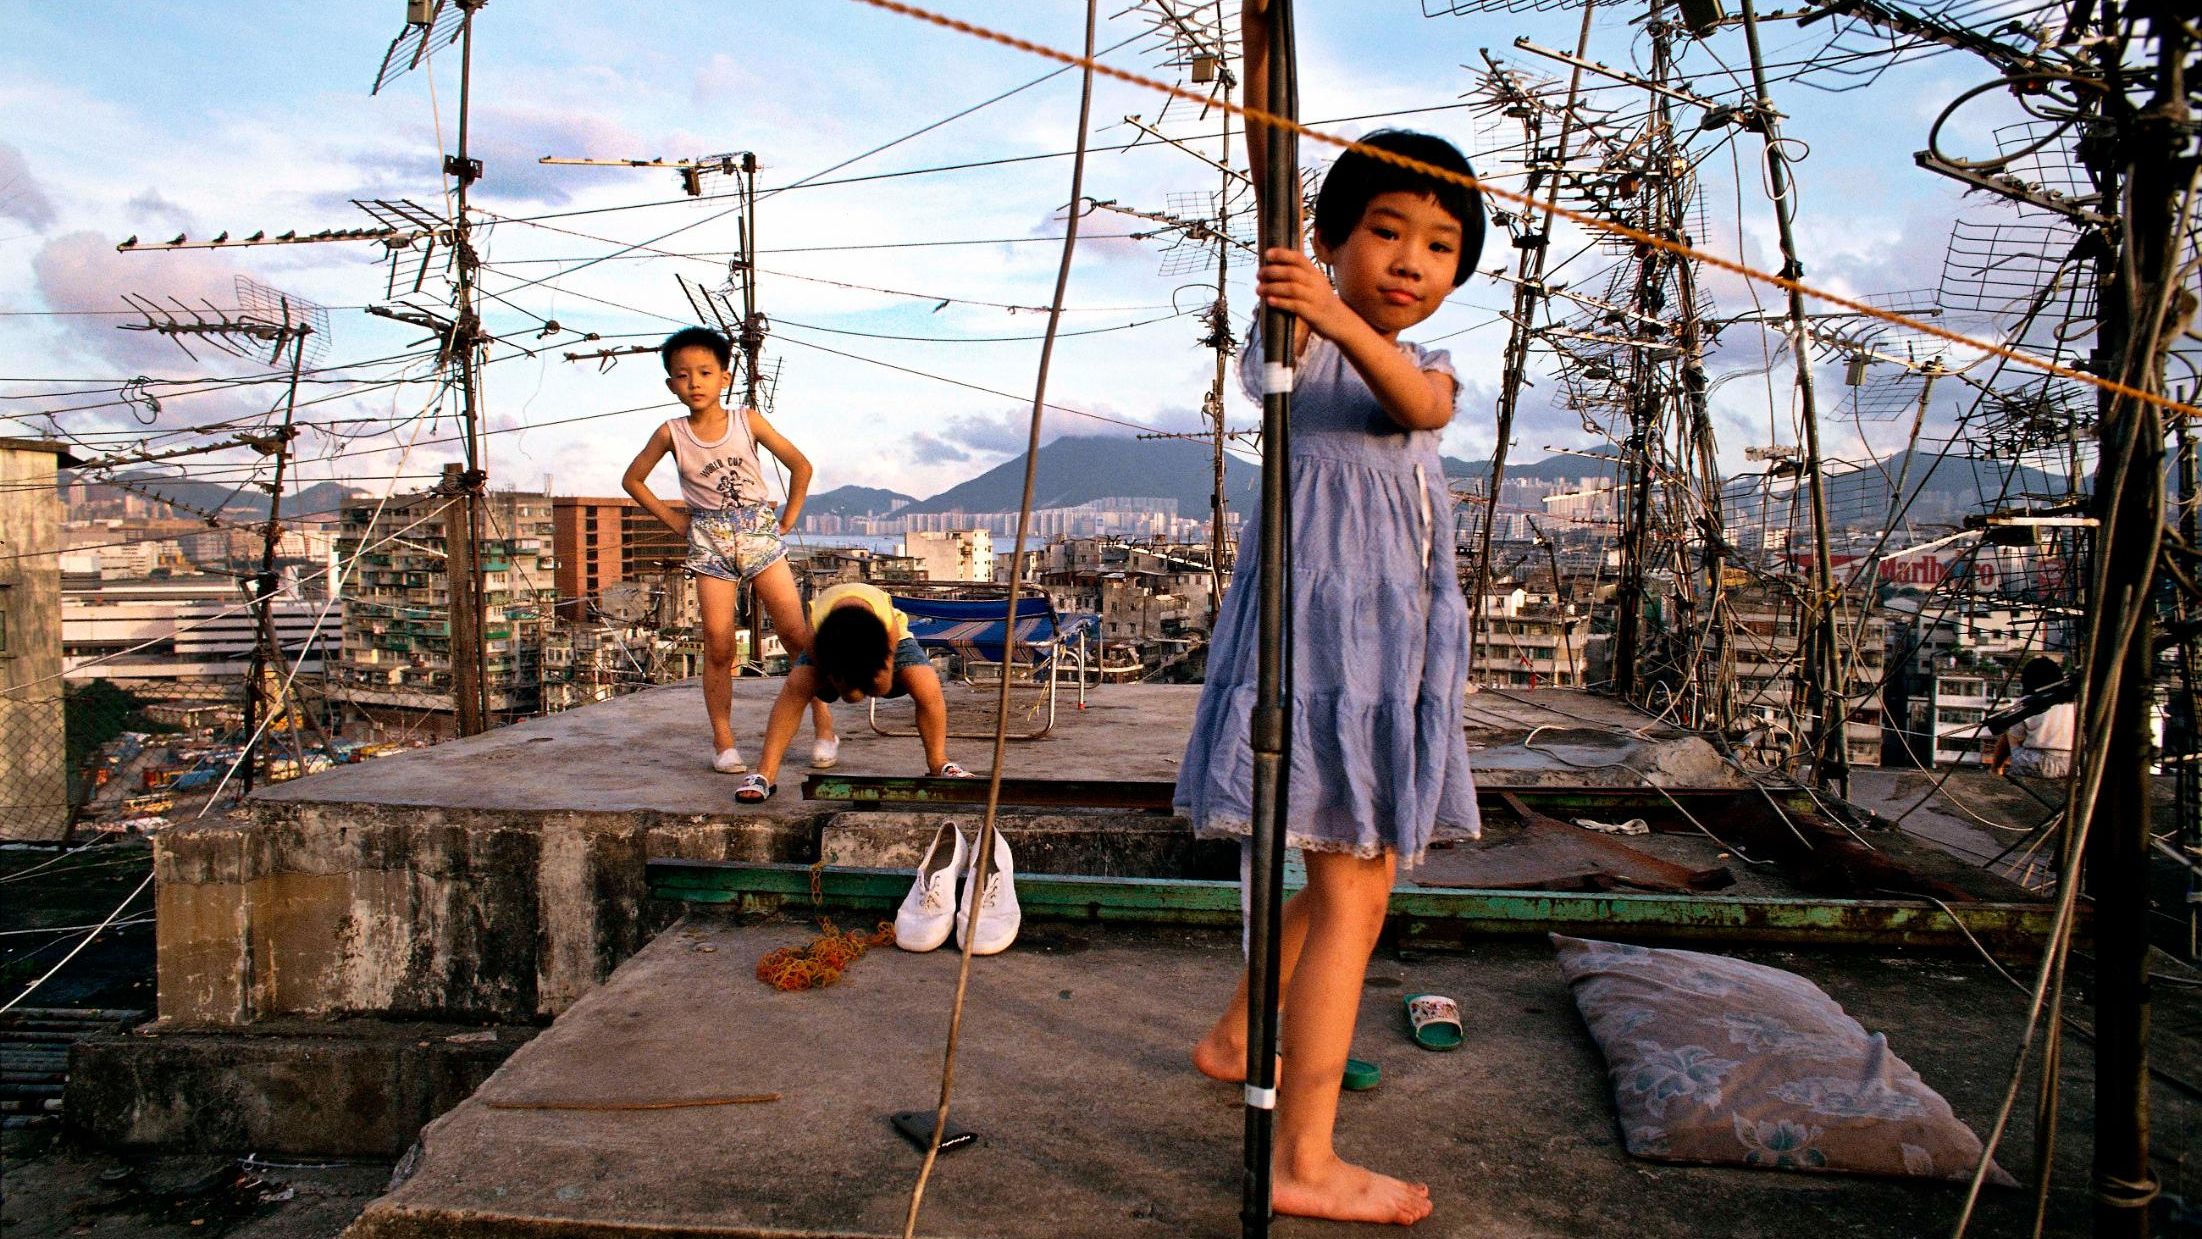 Greg Girard 'Children playing on Walled City rooftop', Hong Kong 1989, Courtesy of Blue Lotus Gallery